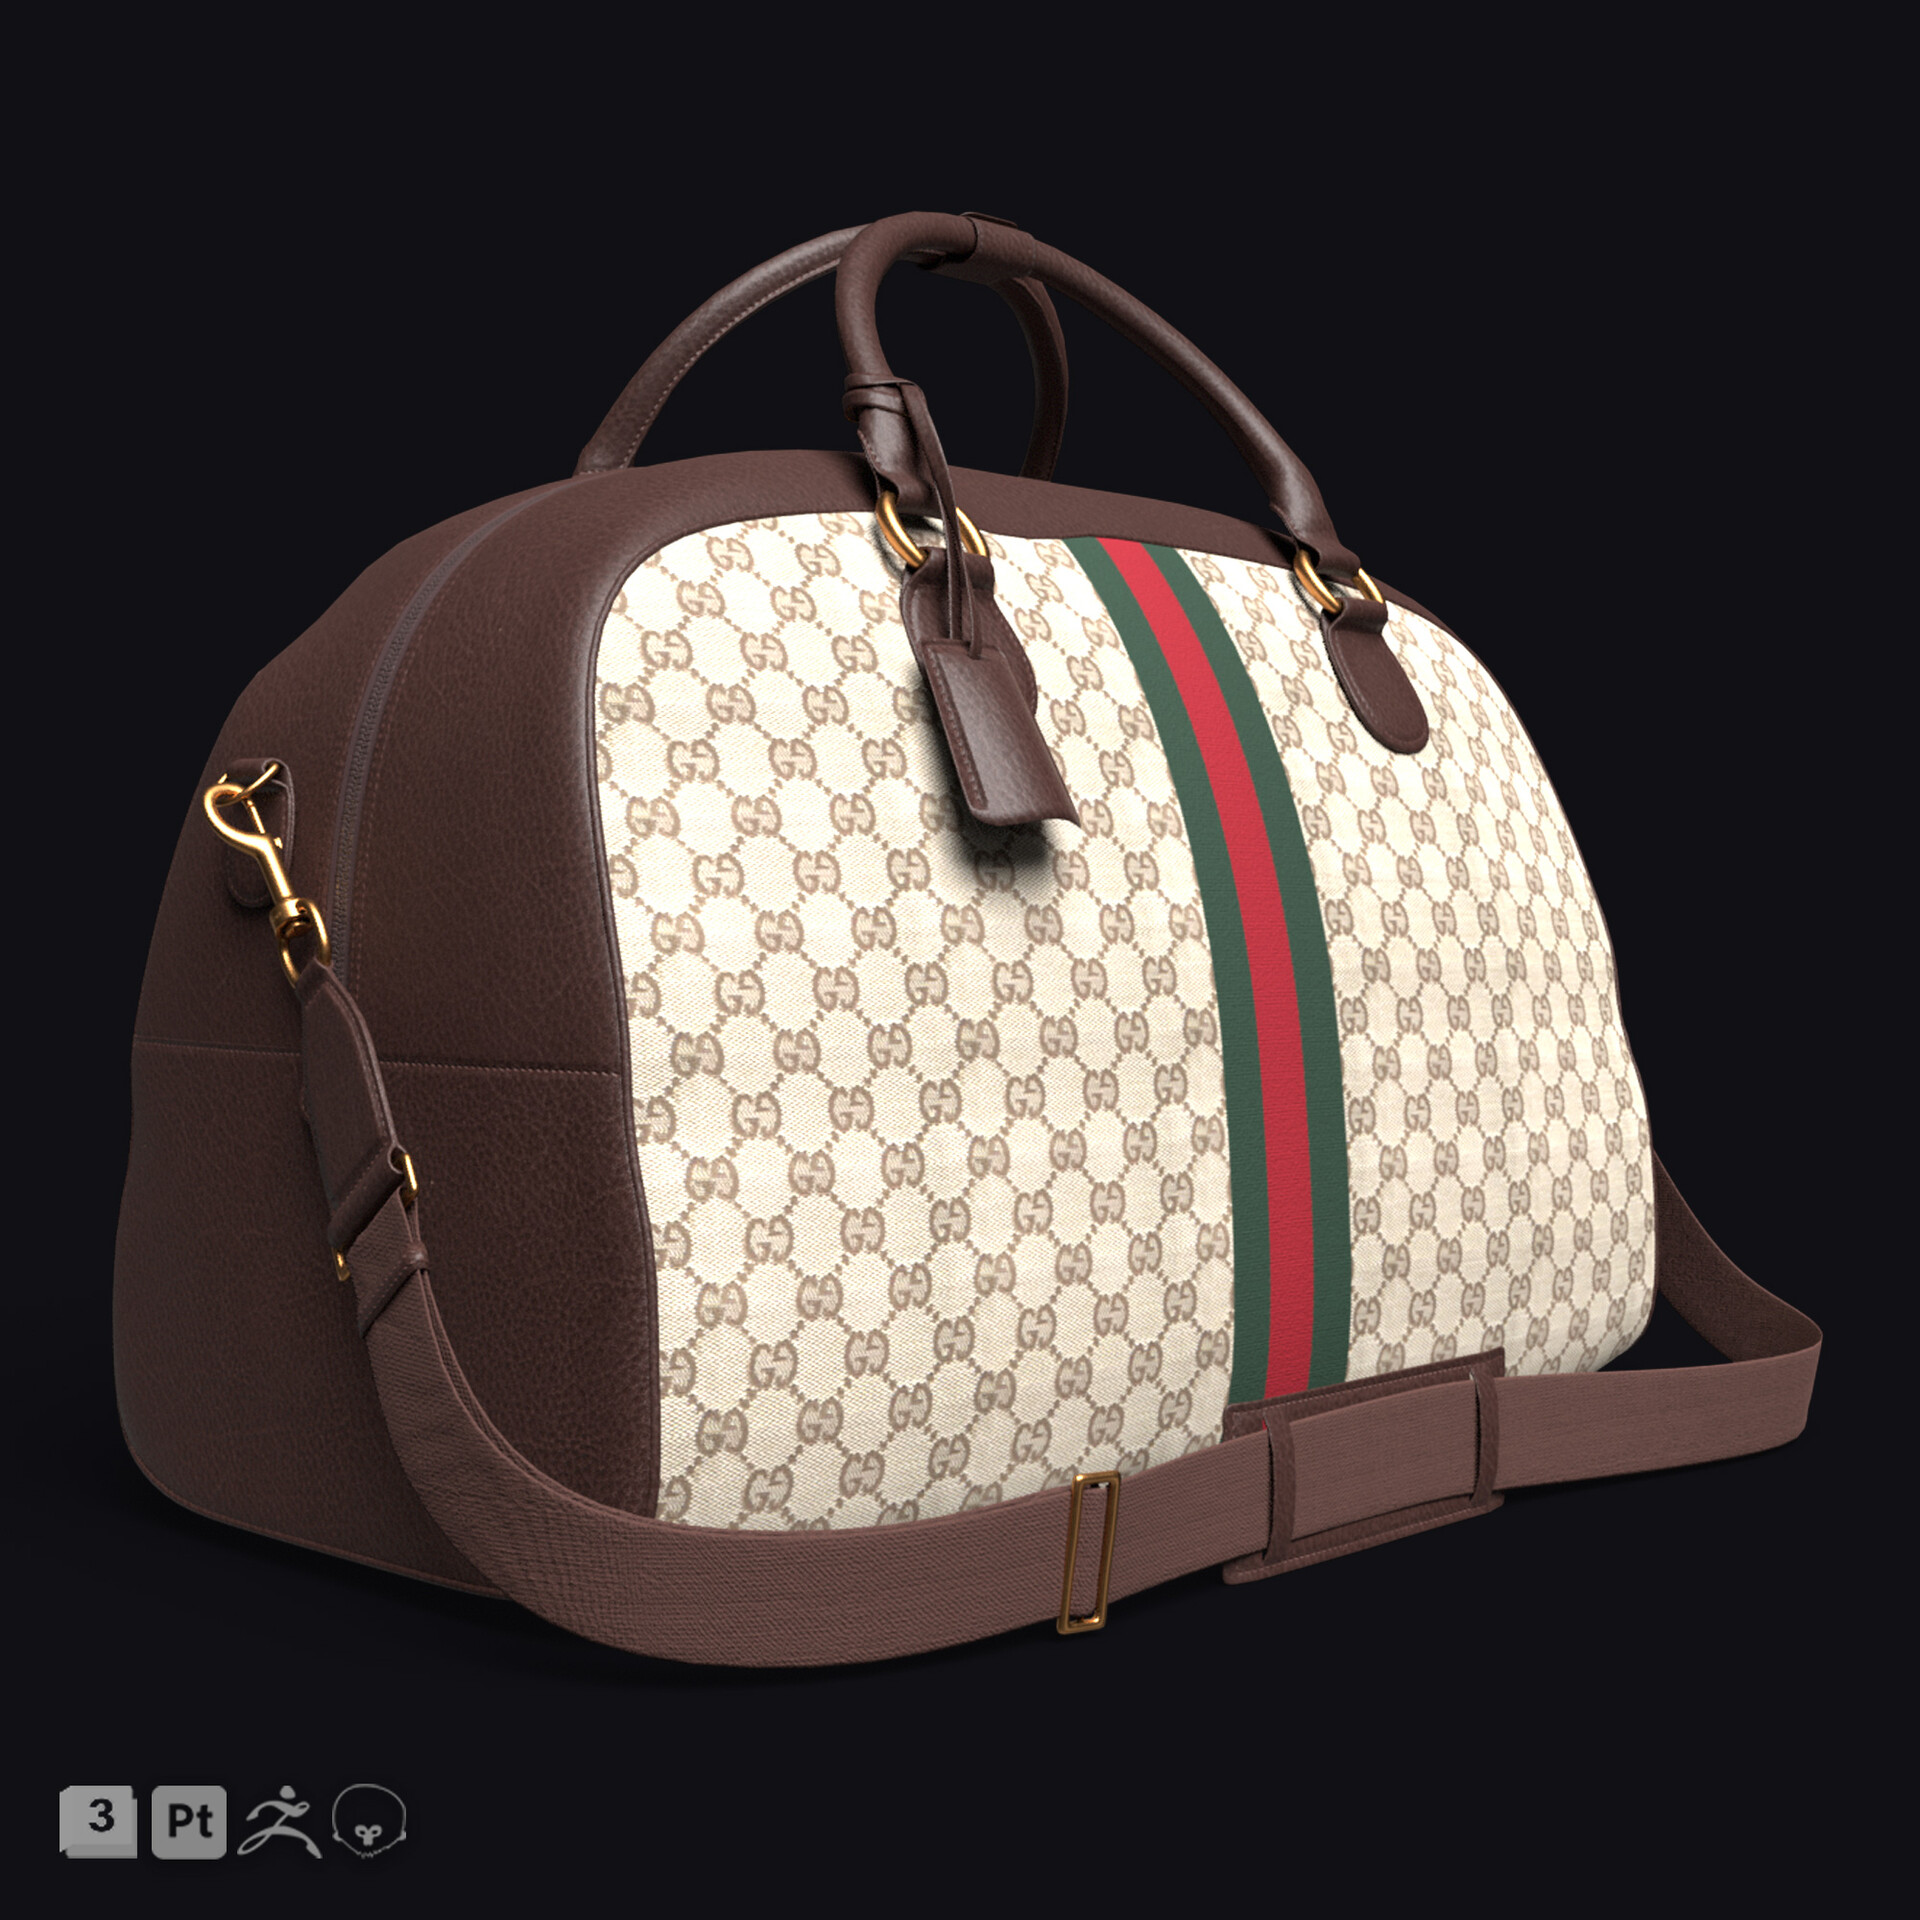 3D Model Collection Gucci Ophidia GG medium travel duffle bag VR